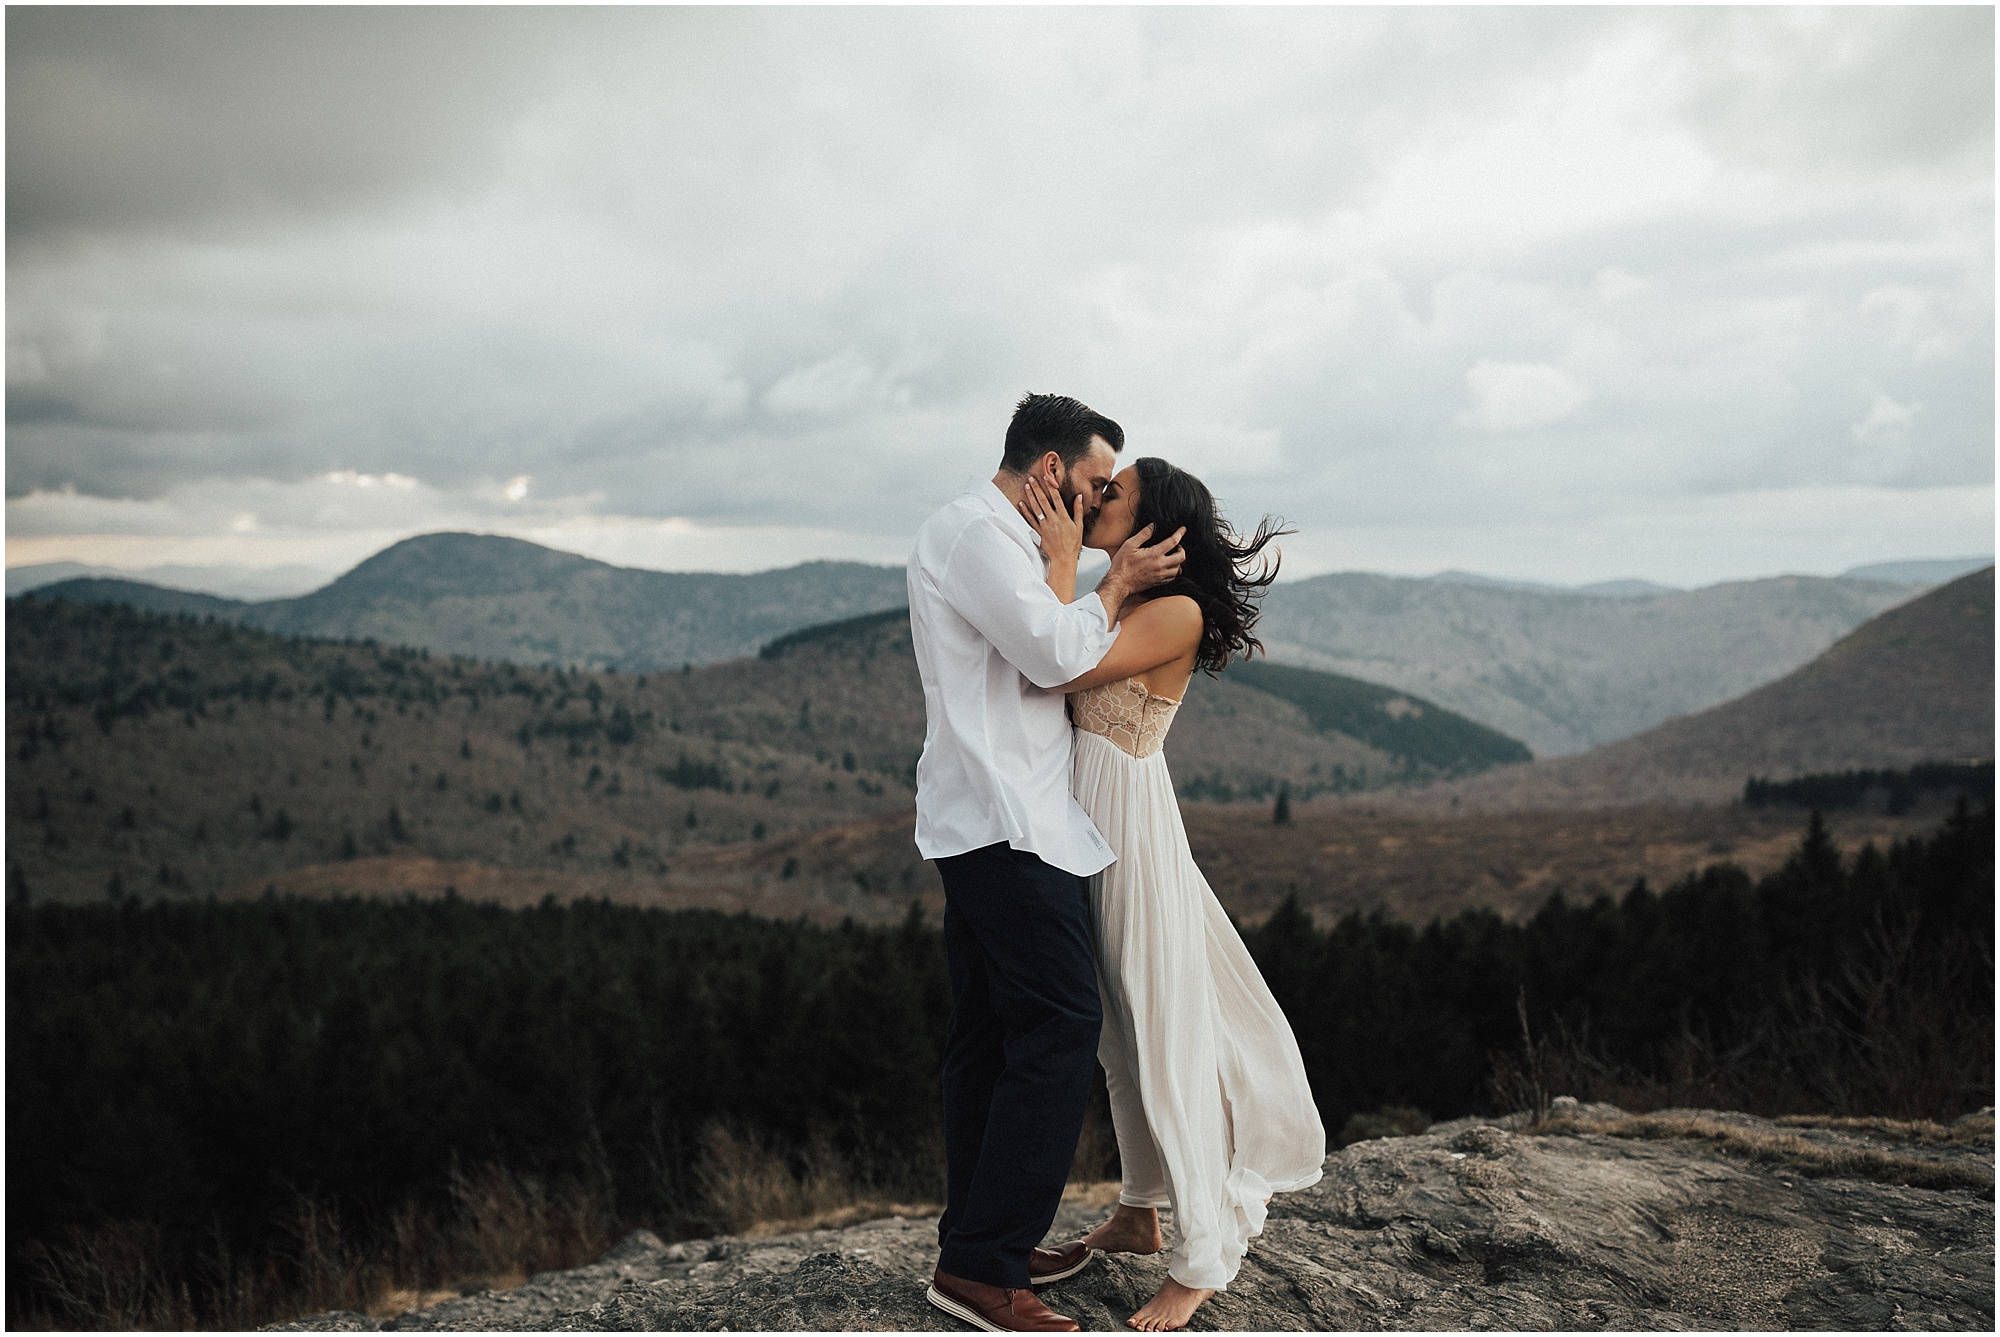 Ashley and Aaron kissing at their Black Balsam Engagement session